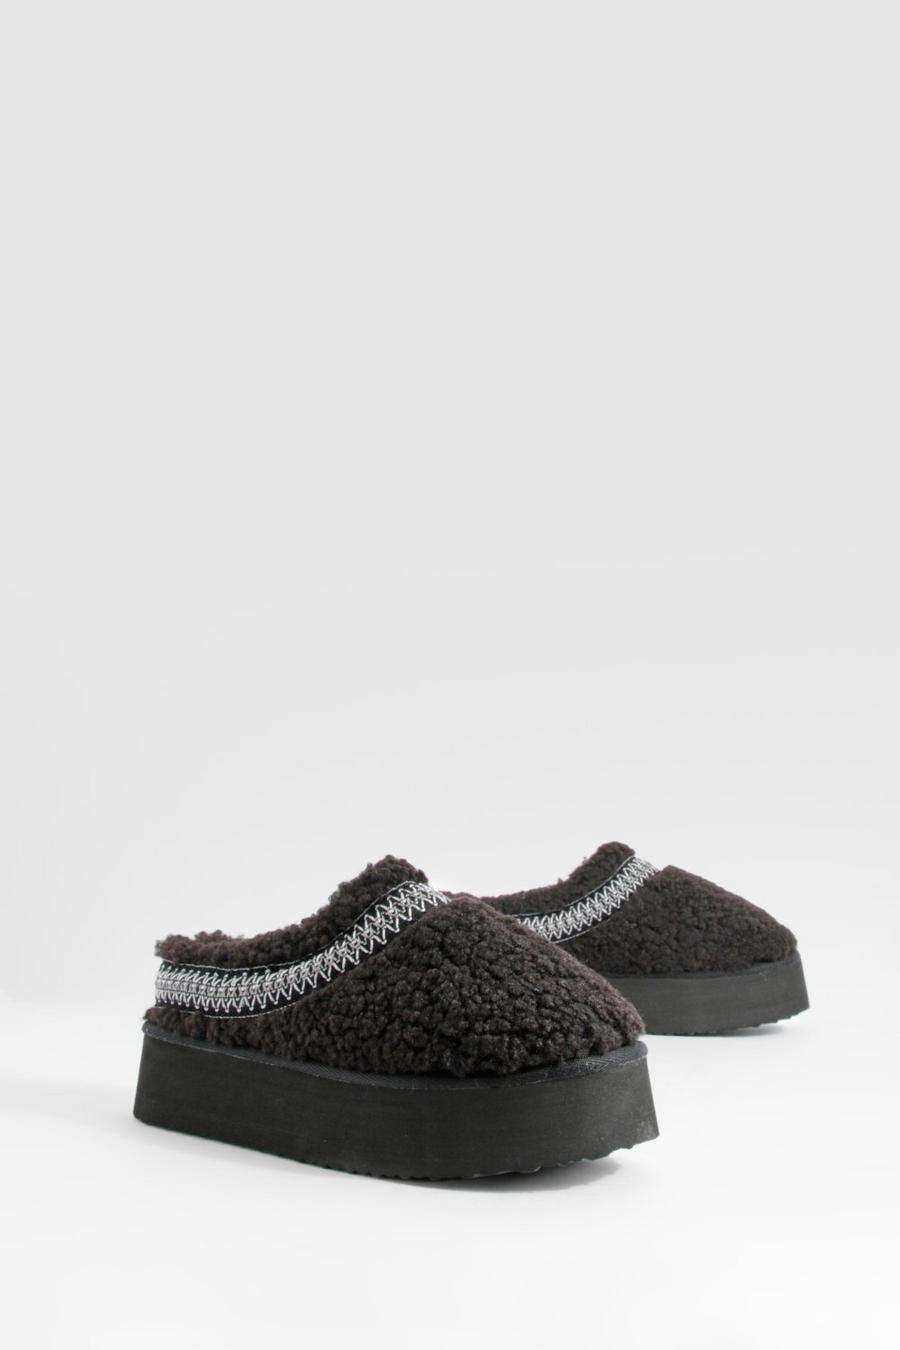 Black Borg Embroidered Platform Cosy Mules